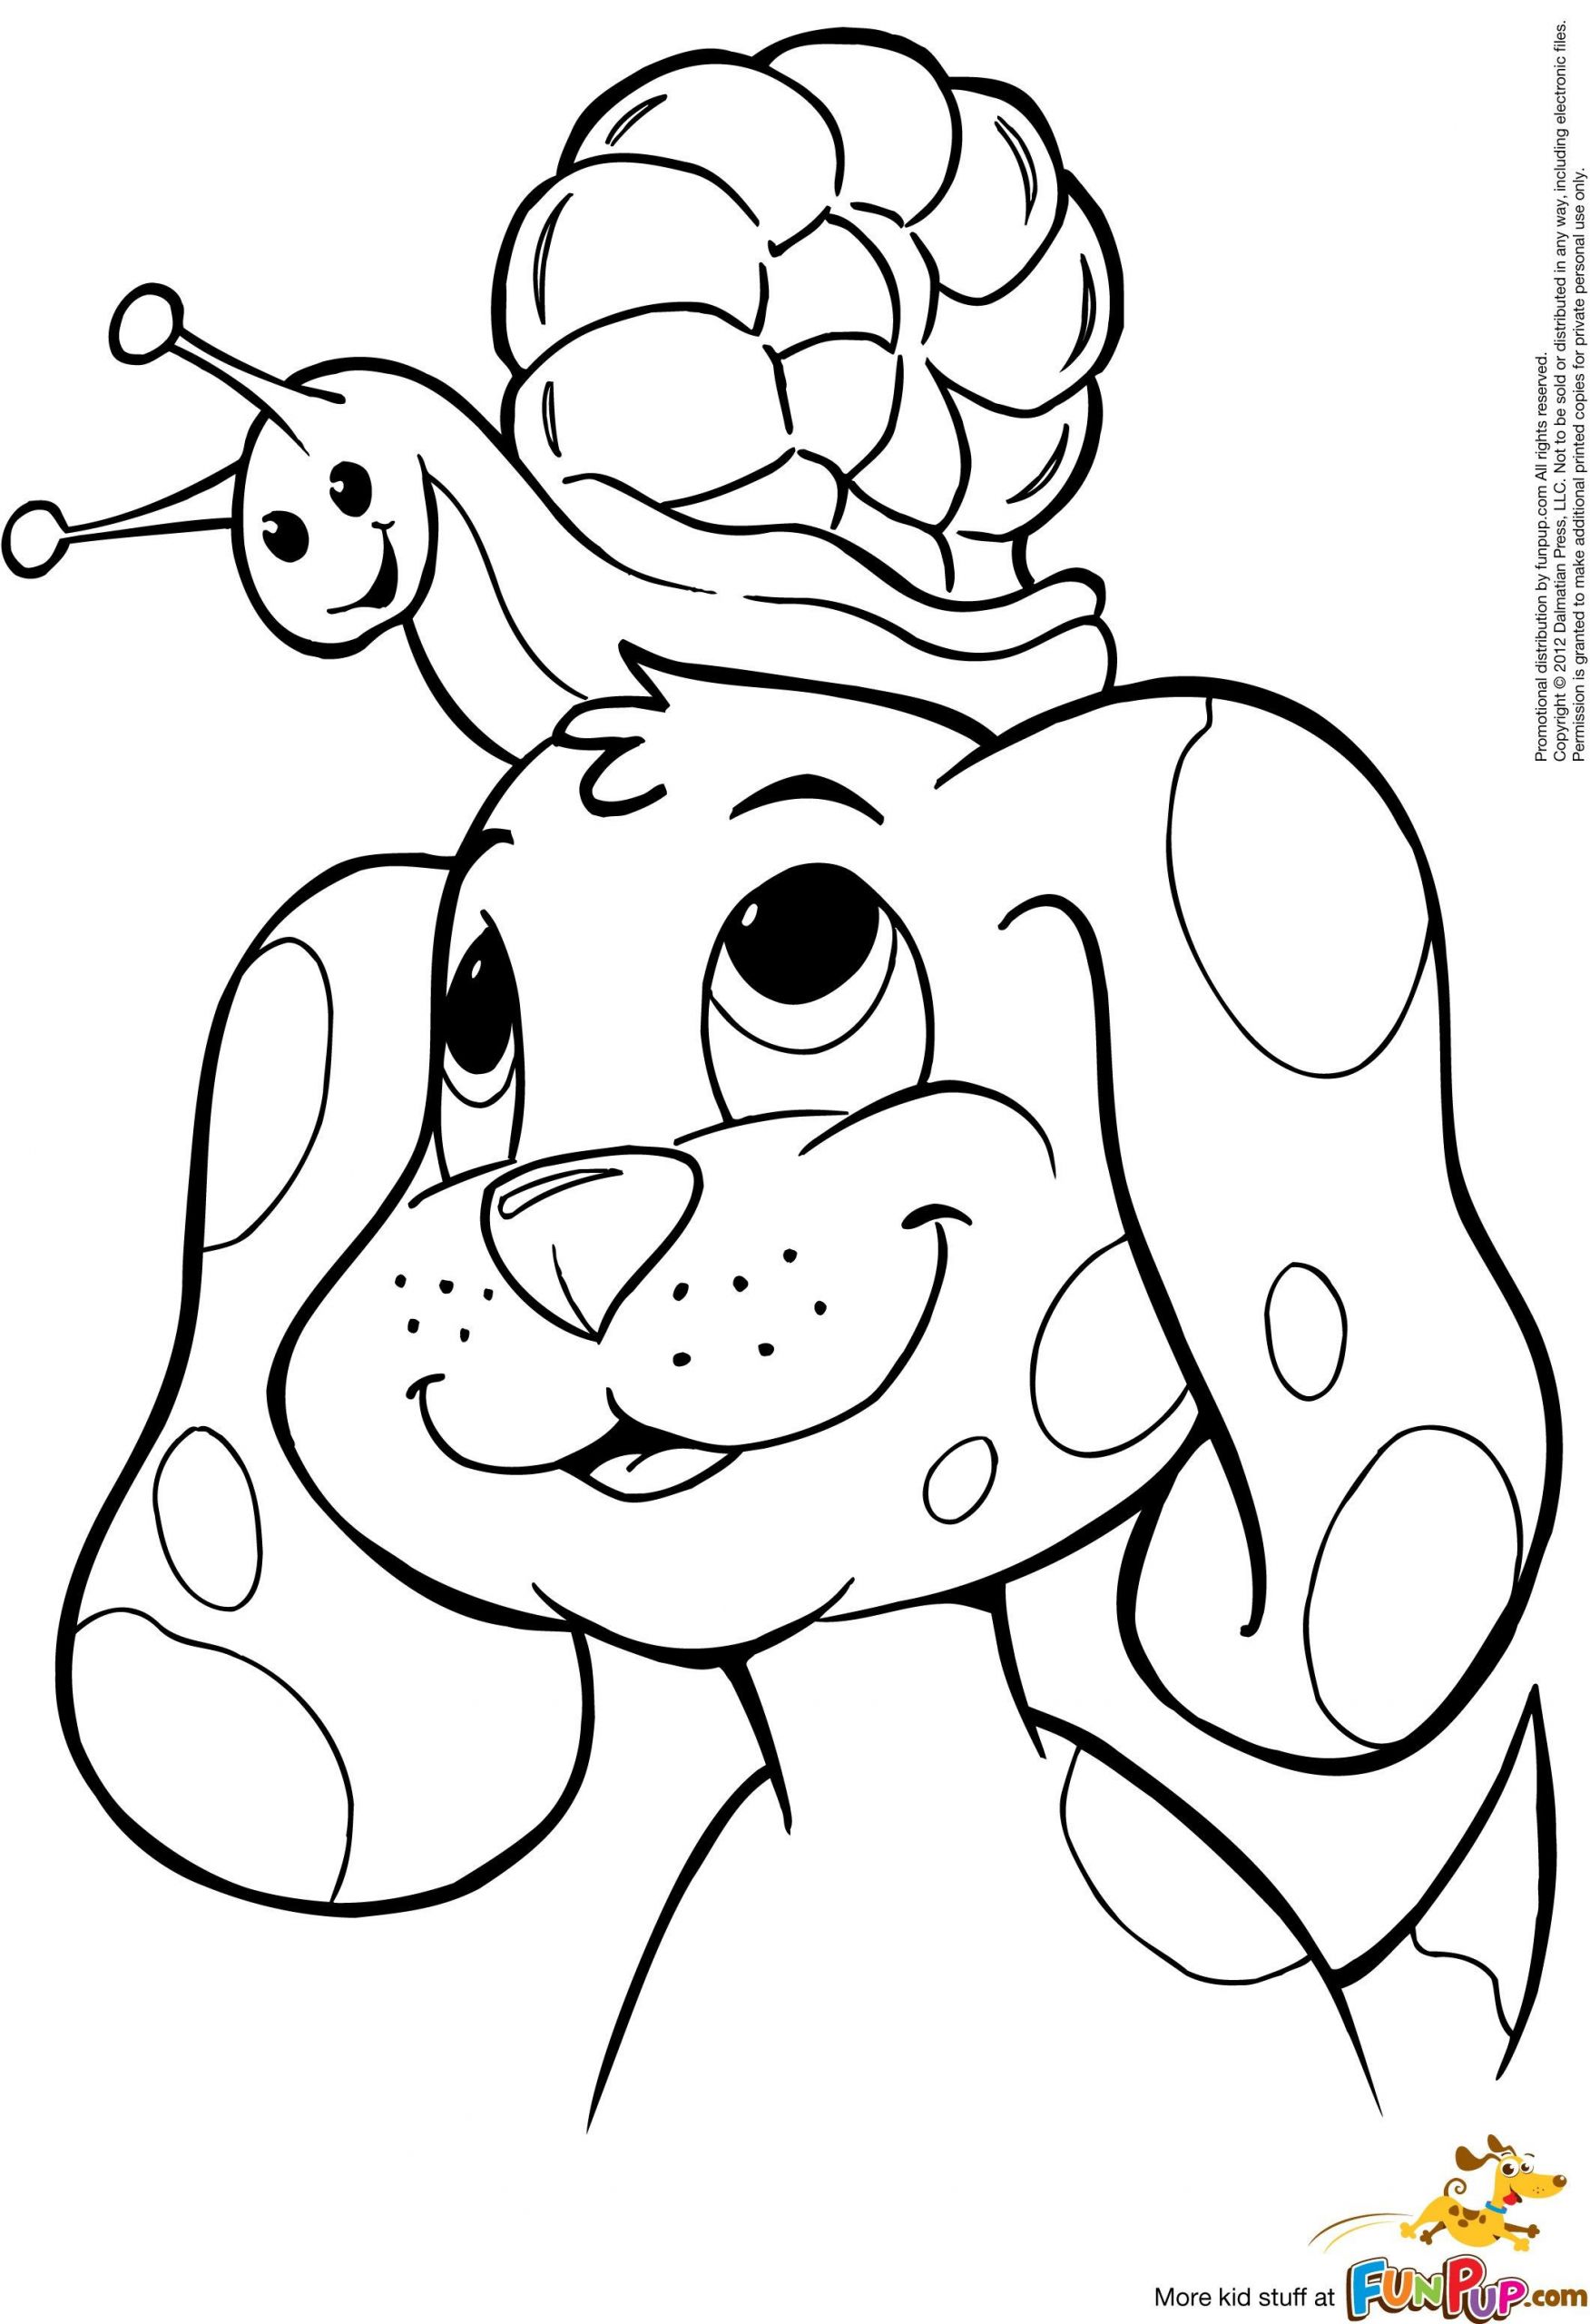 Free Printable Puppy Coloring Pages
 Puppy 1 0 colouring pages Clip Art Miscellaneous